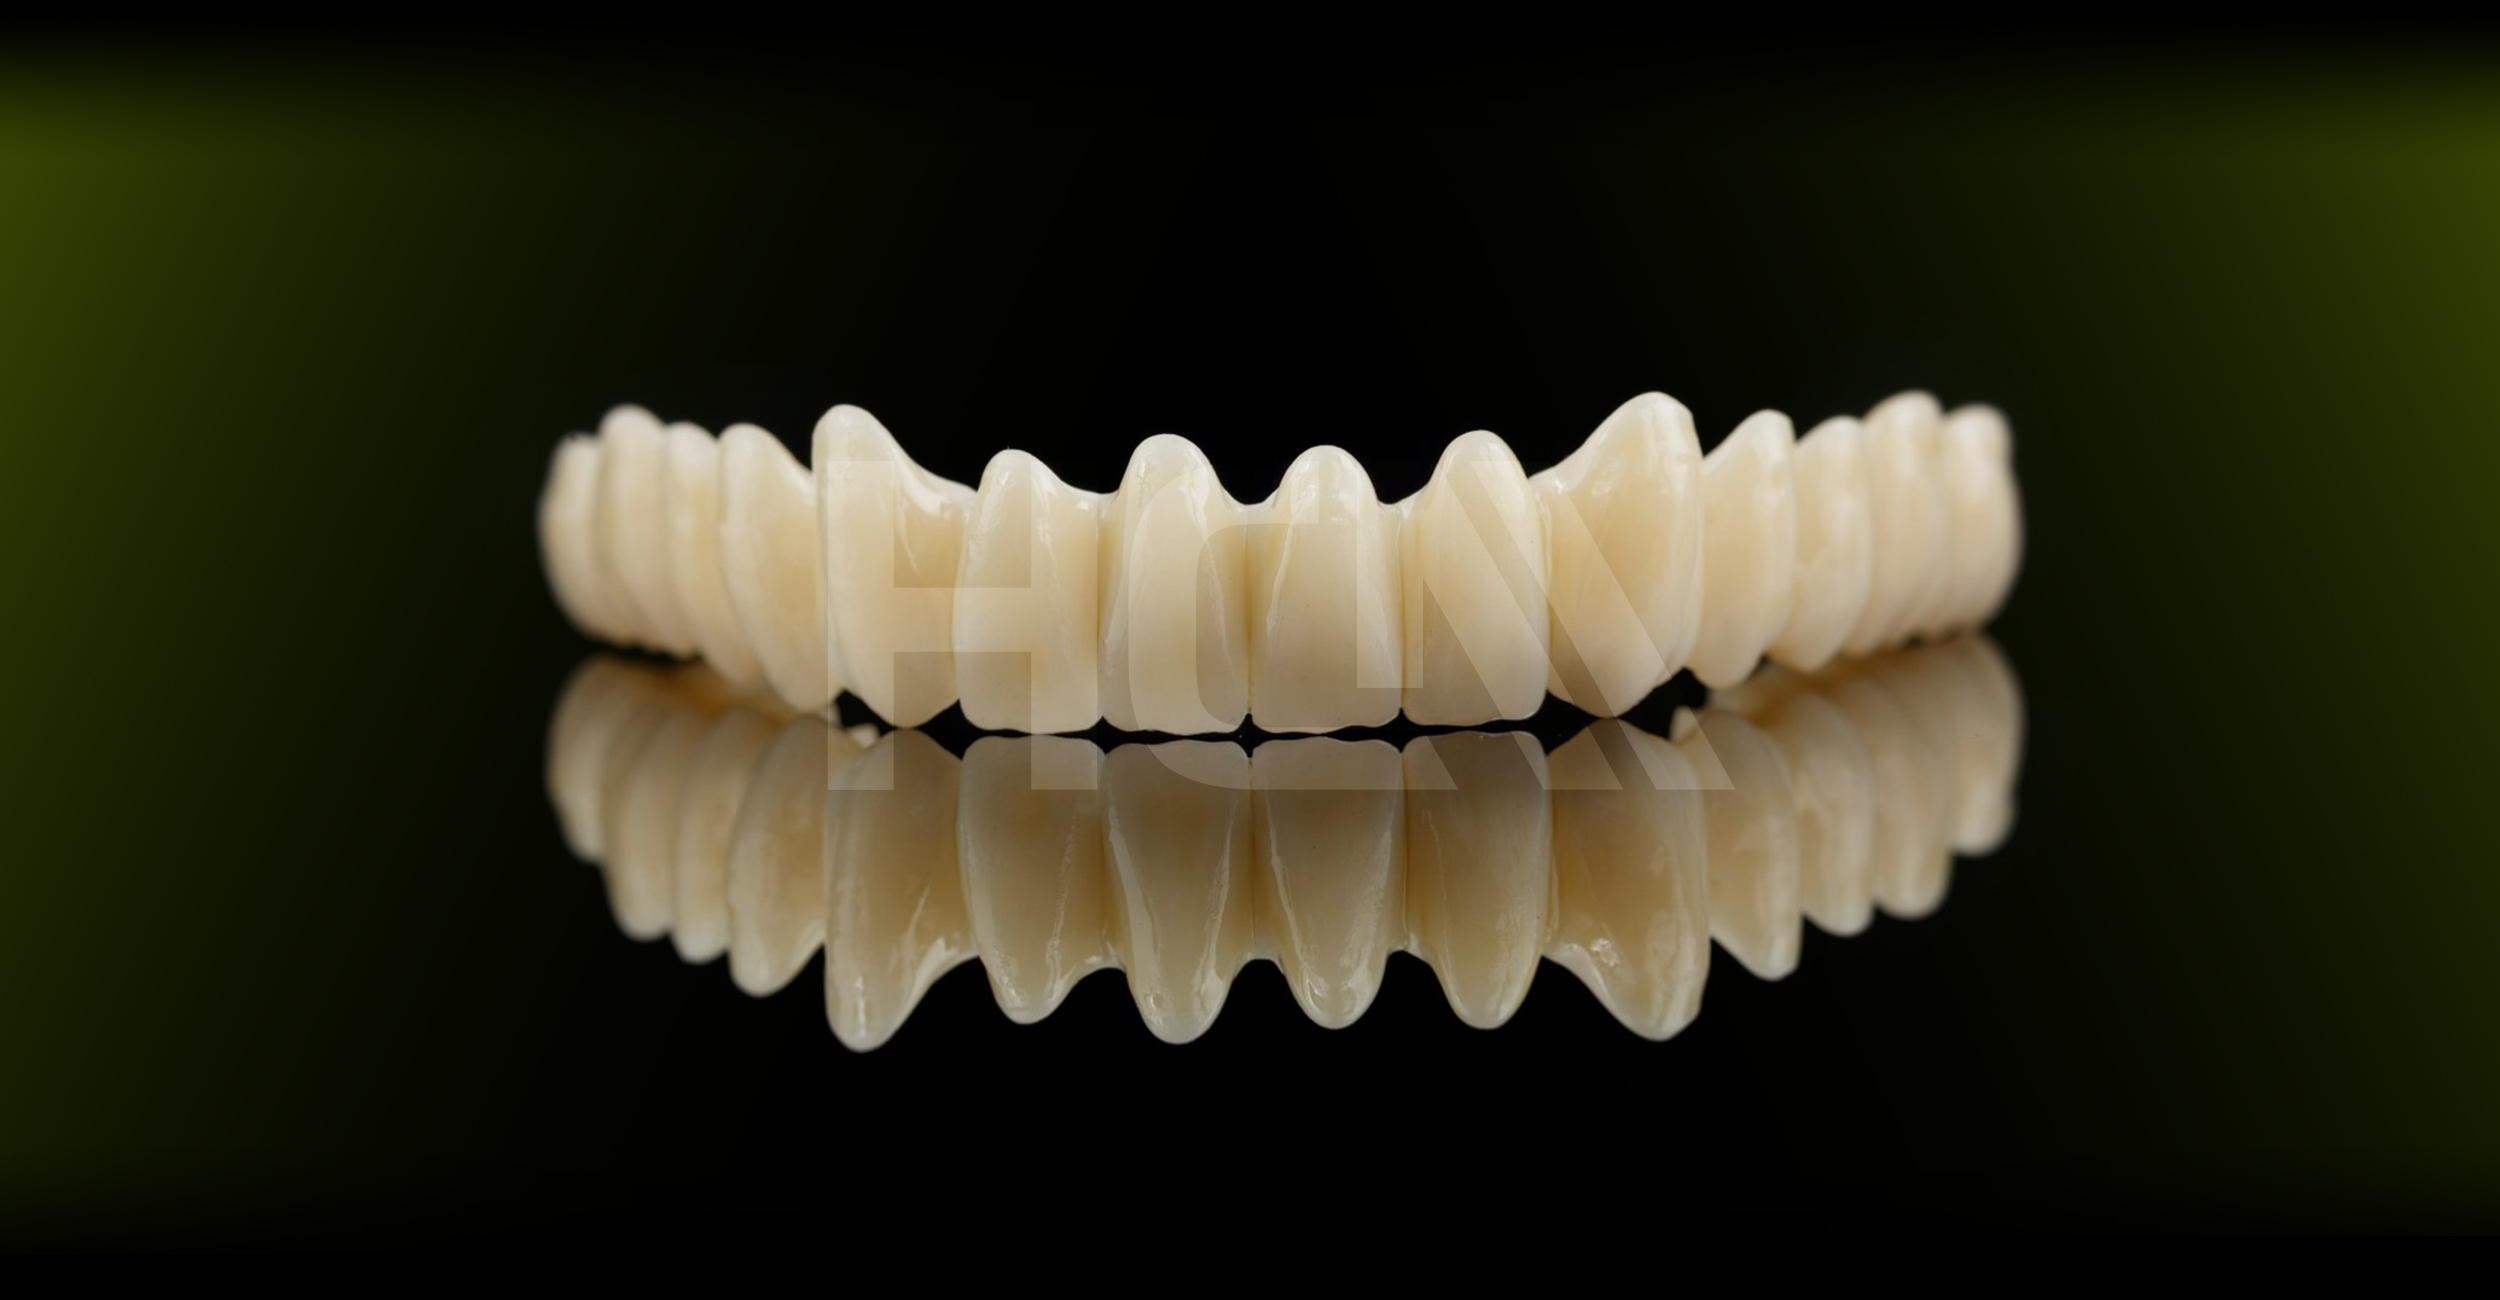 Cemented or screw retained crowns